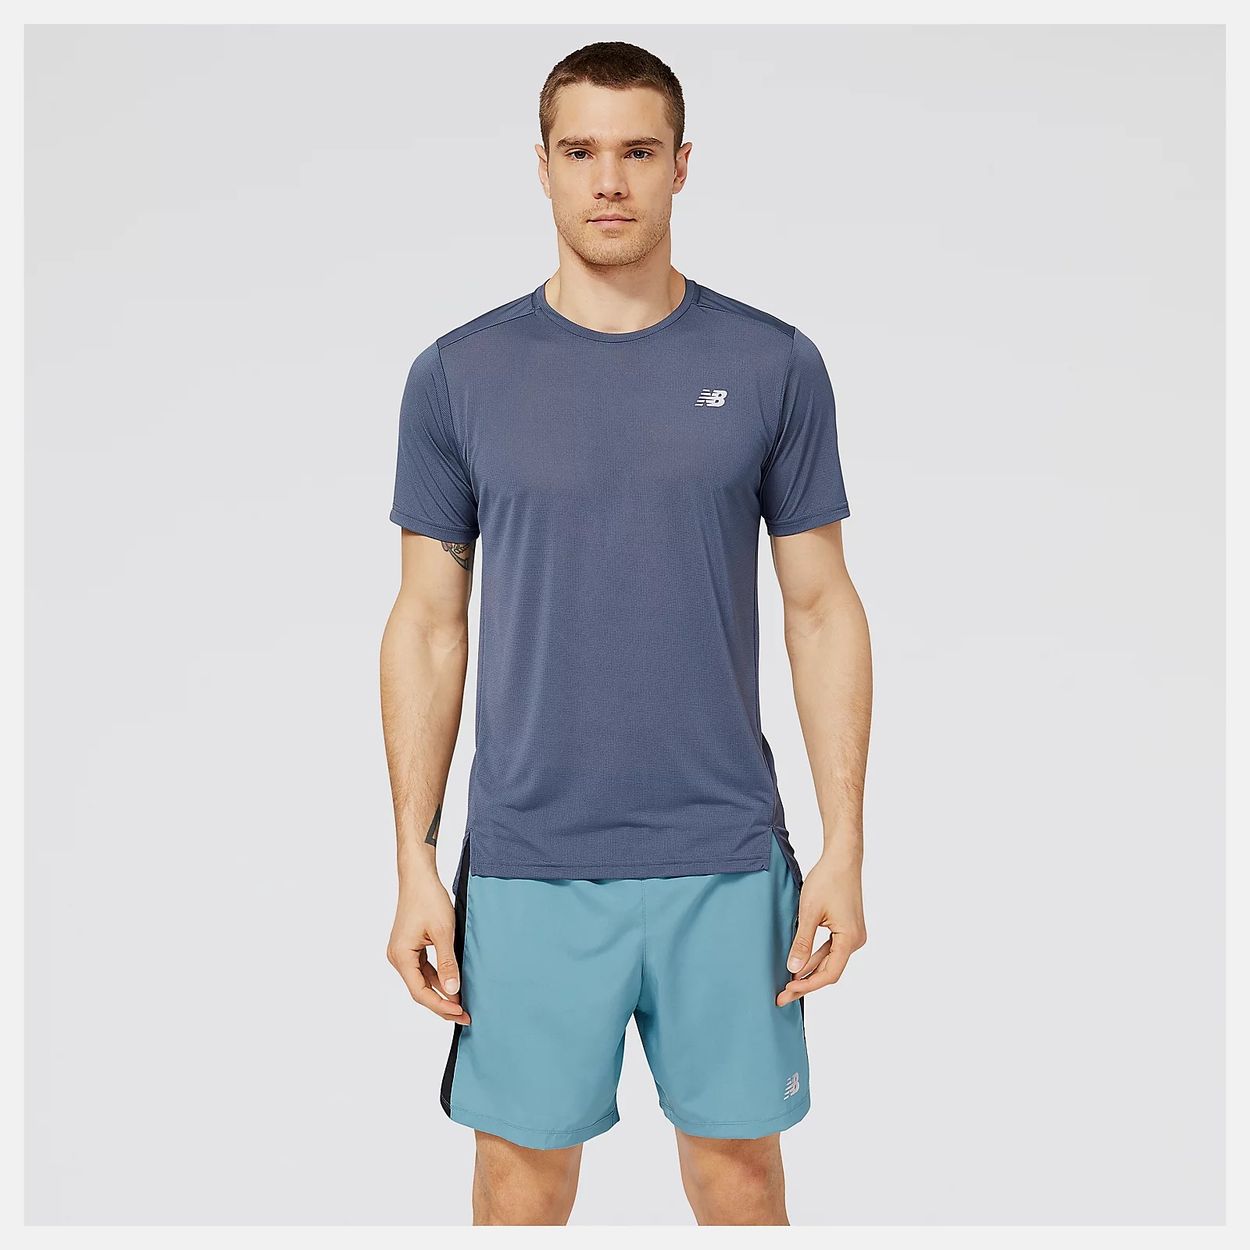 15 Best Workout Shirts for Men 2023 to Keep You Looking Sharp and